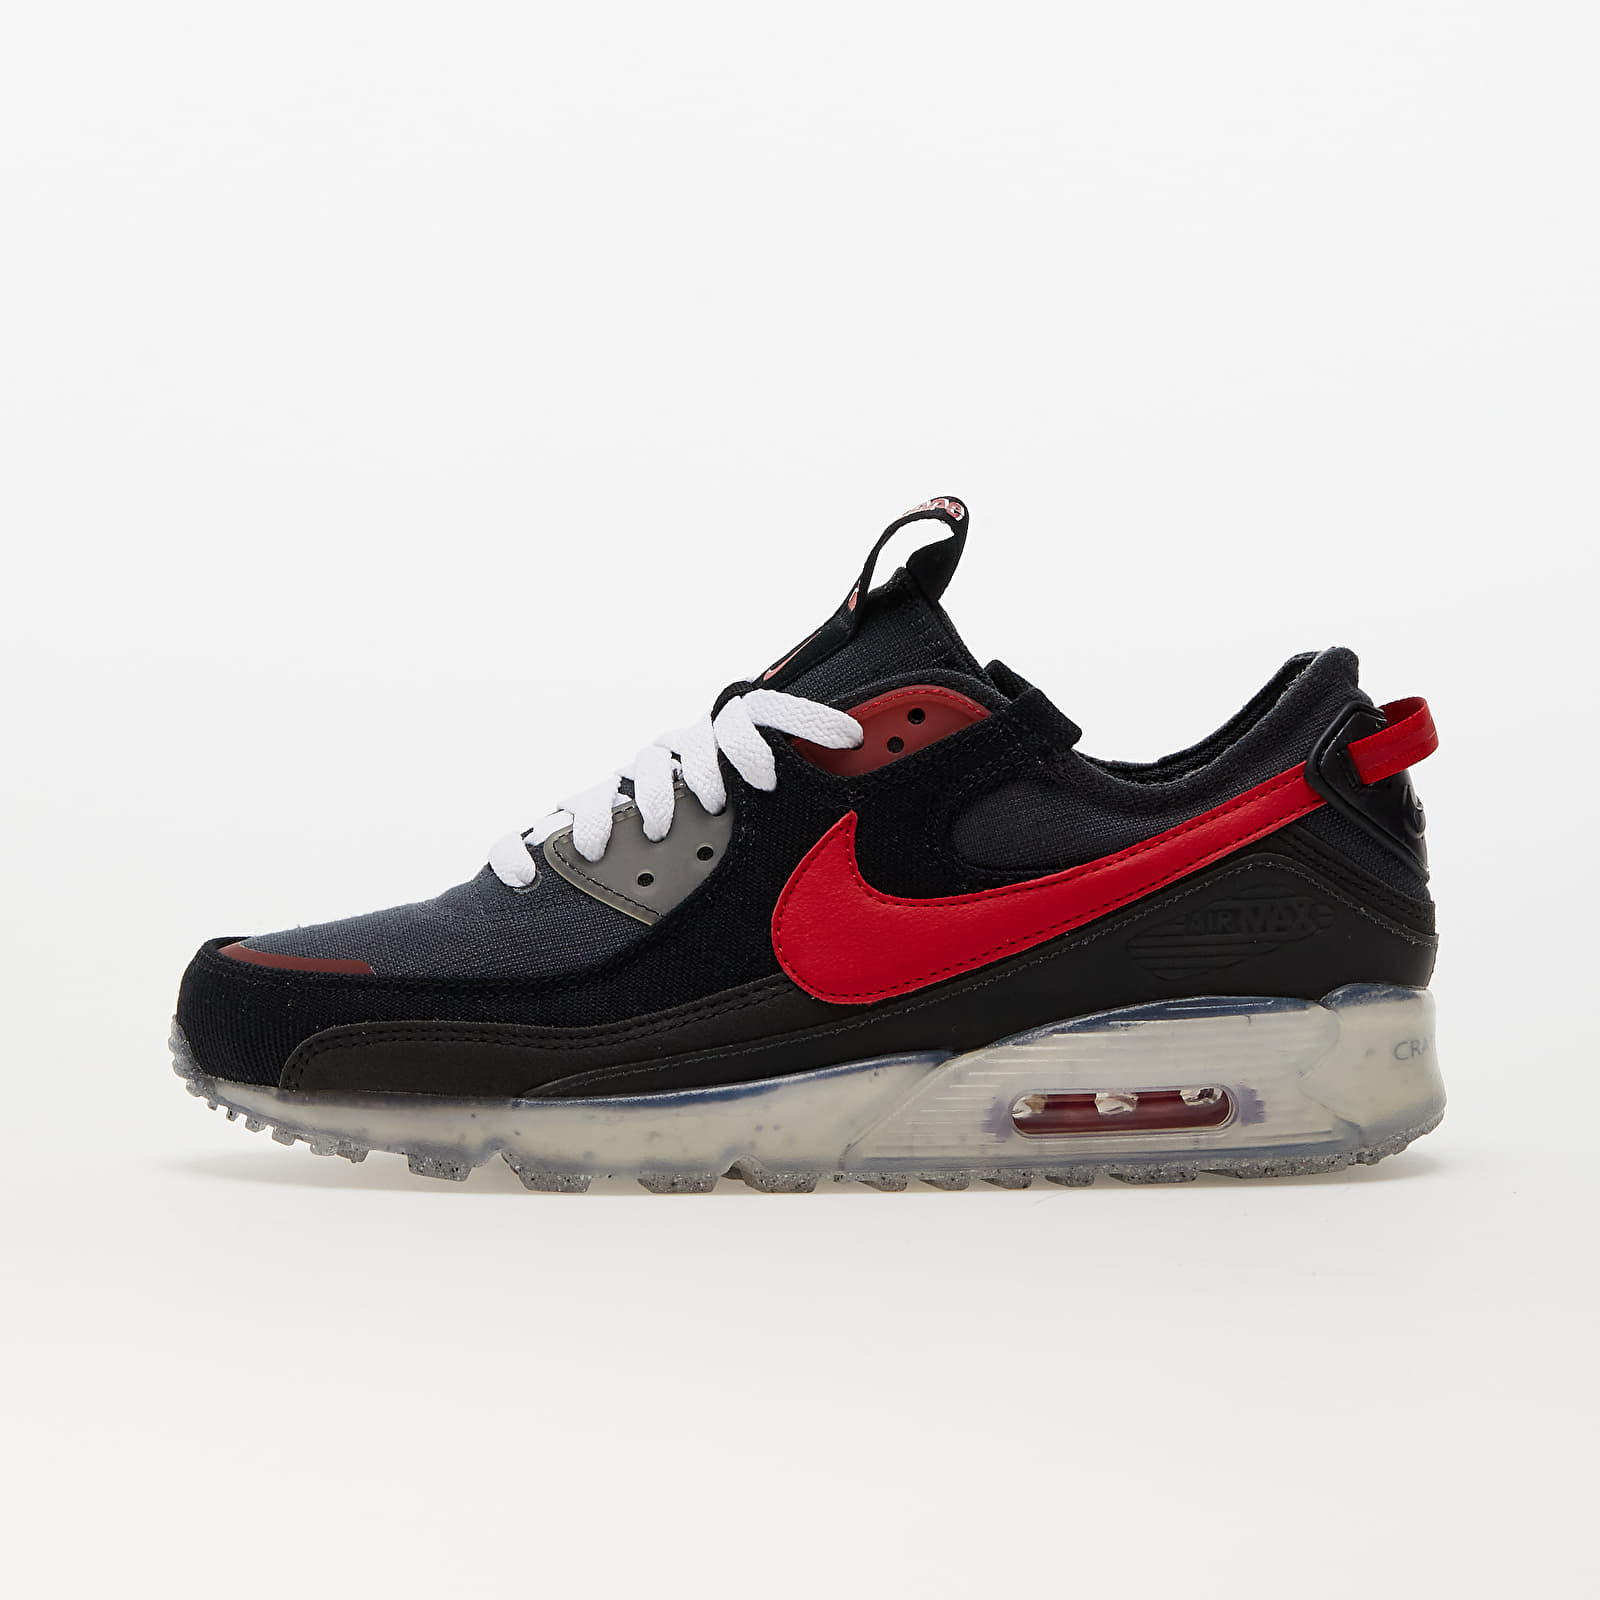 Chaussures et baskets homme Nike Air Max Terrascape 90 Anthracite/ University Red-Black